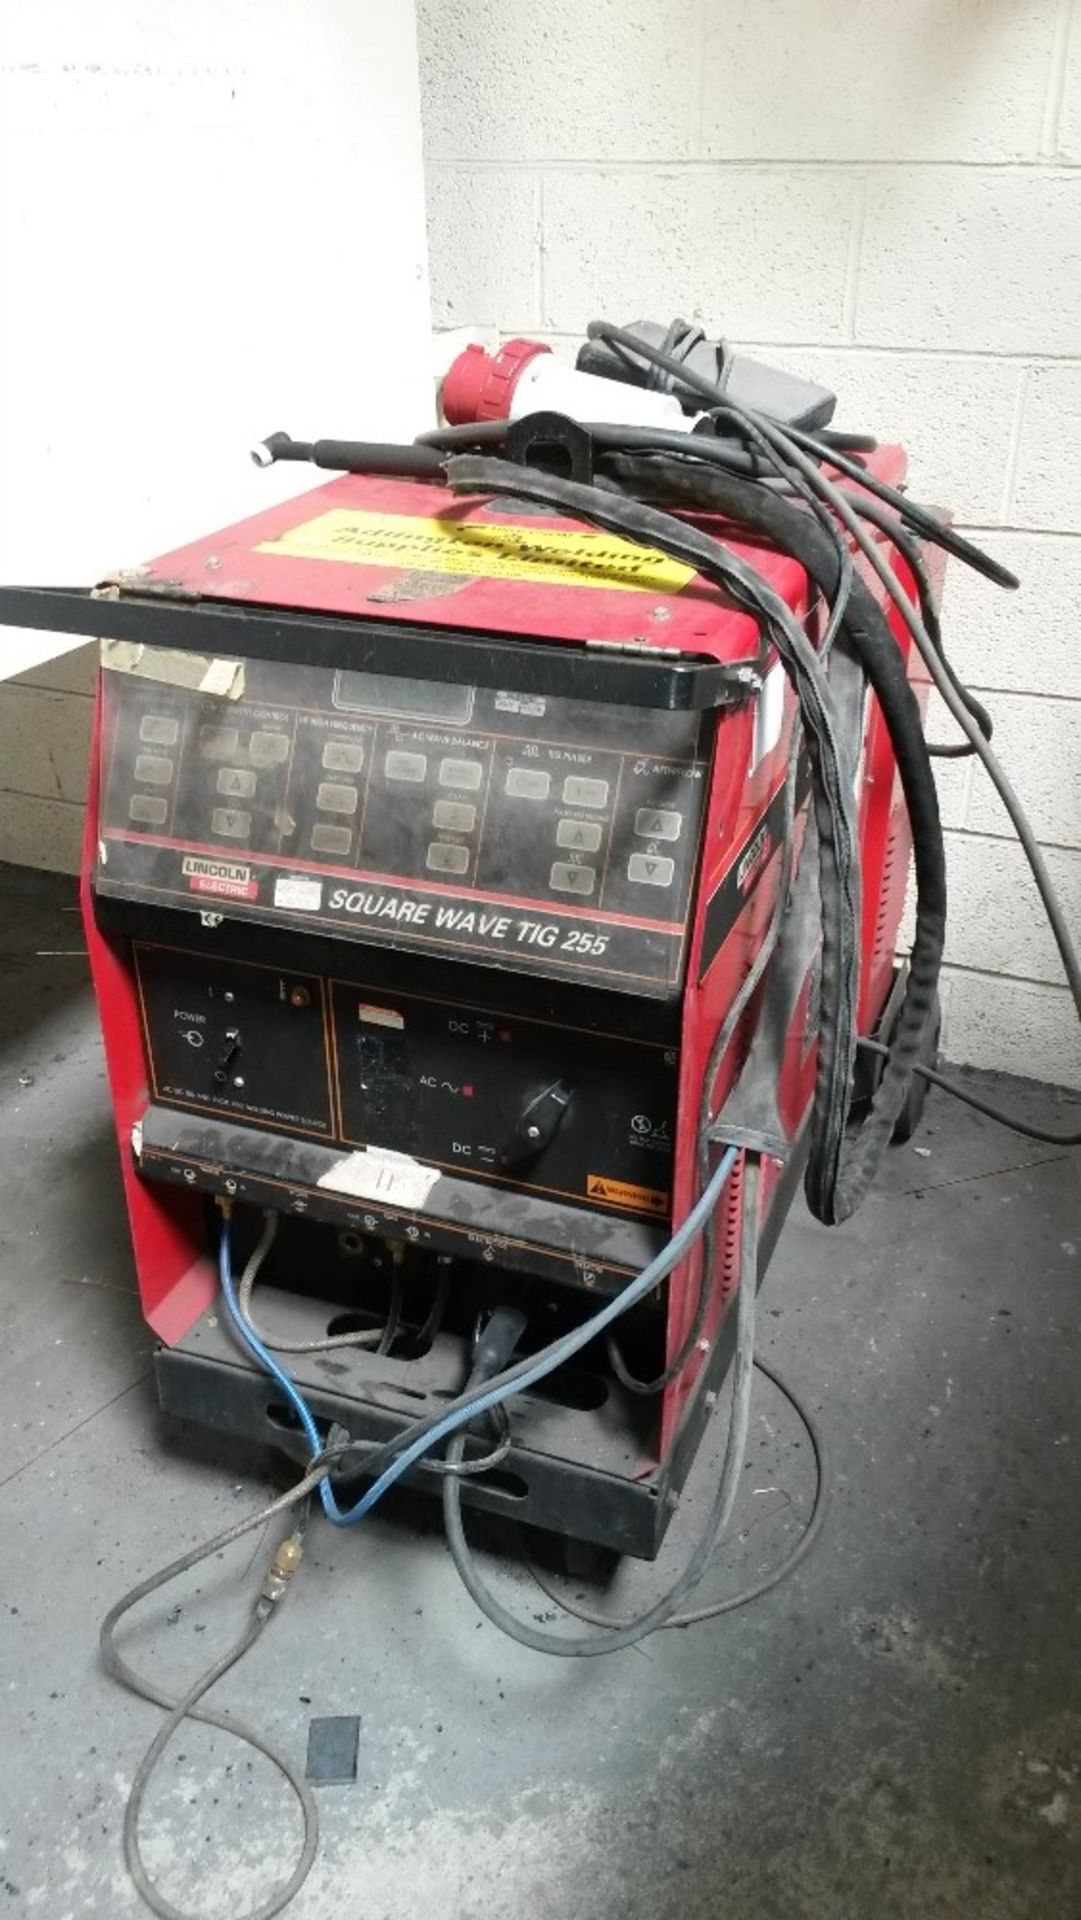 Lincoln 3 Phase electric Square Wave Tig Welder 255, has been used till last week